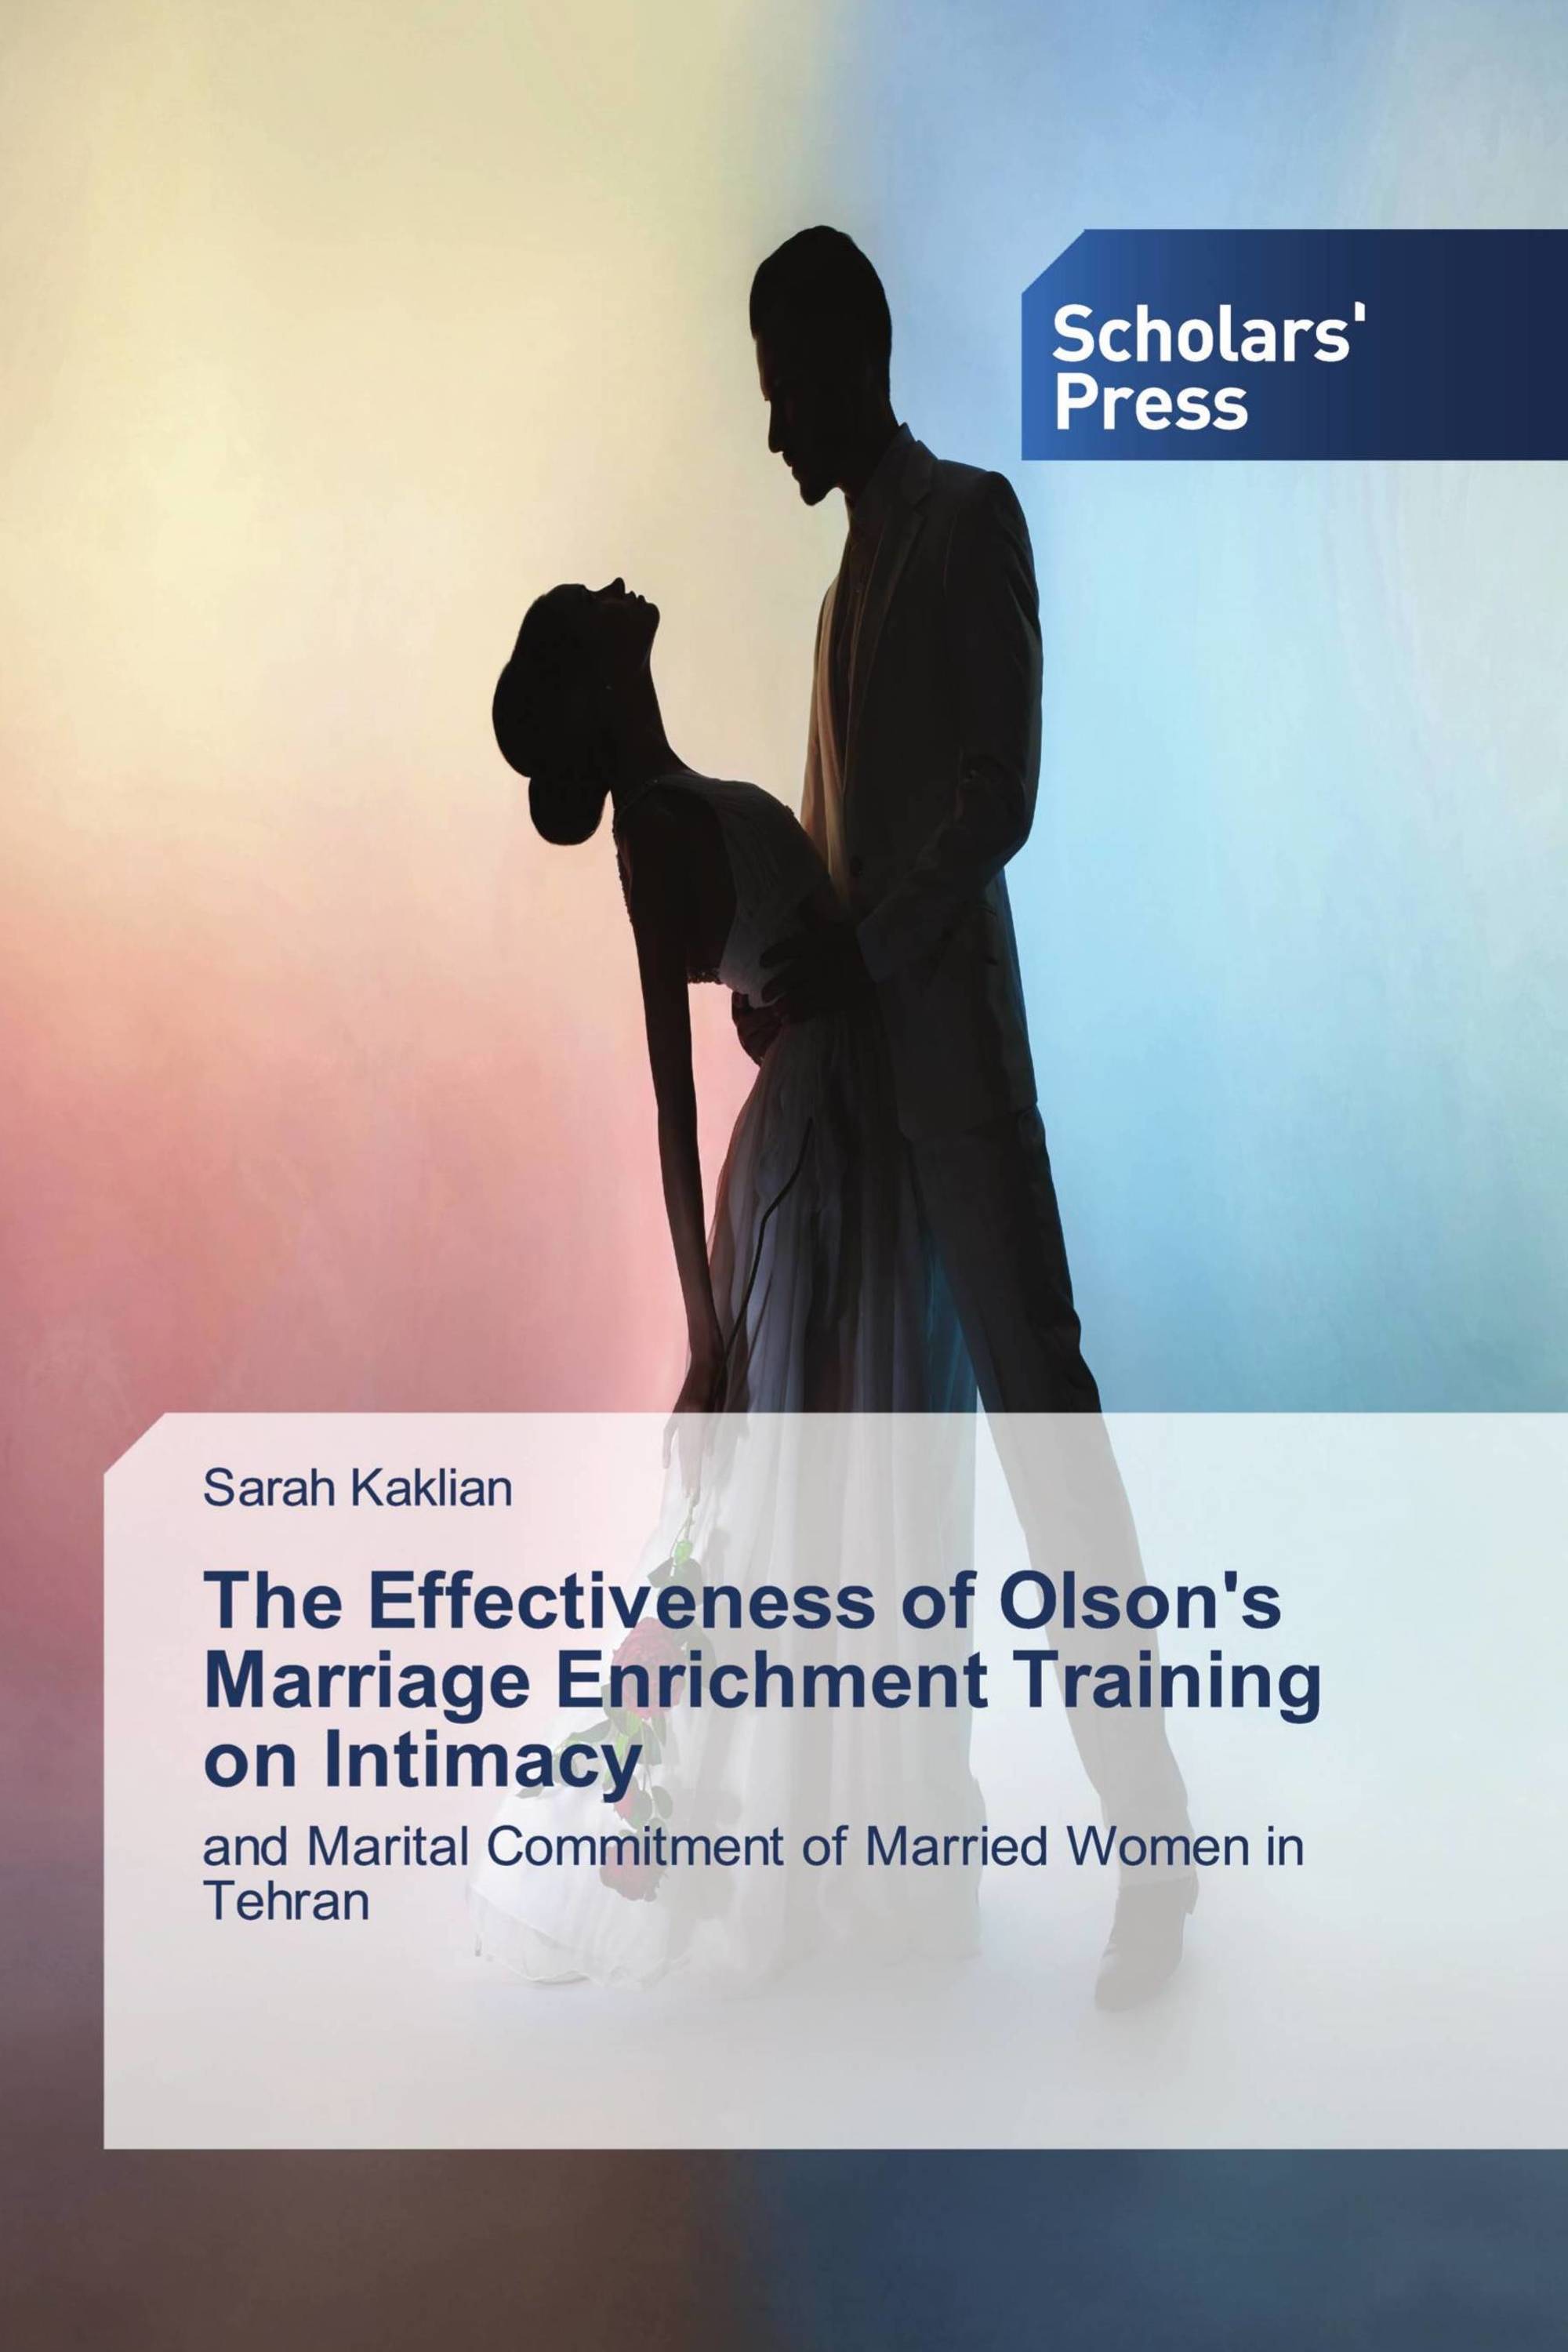 The Effectiveness of Olson's Marriage Enrichment Training on Intimacy